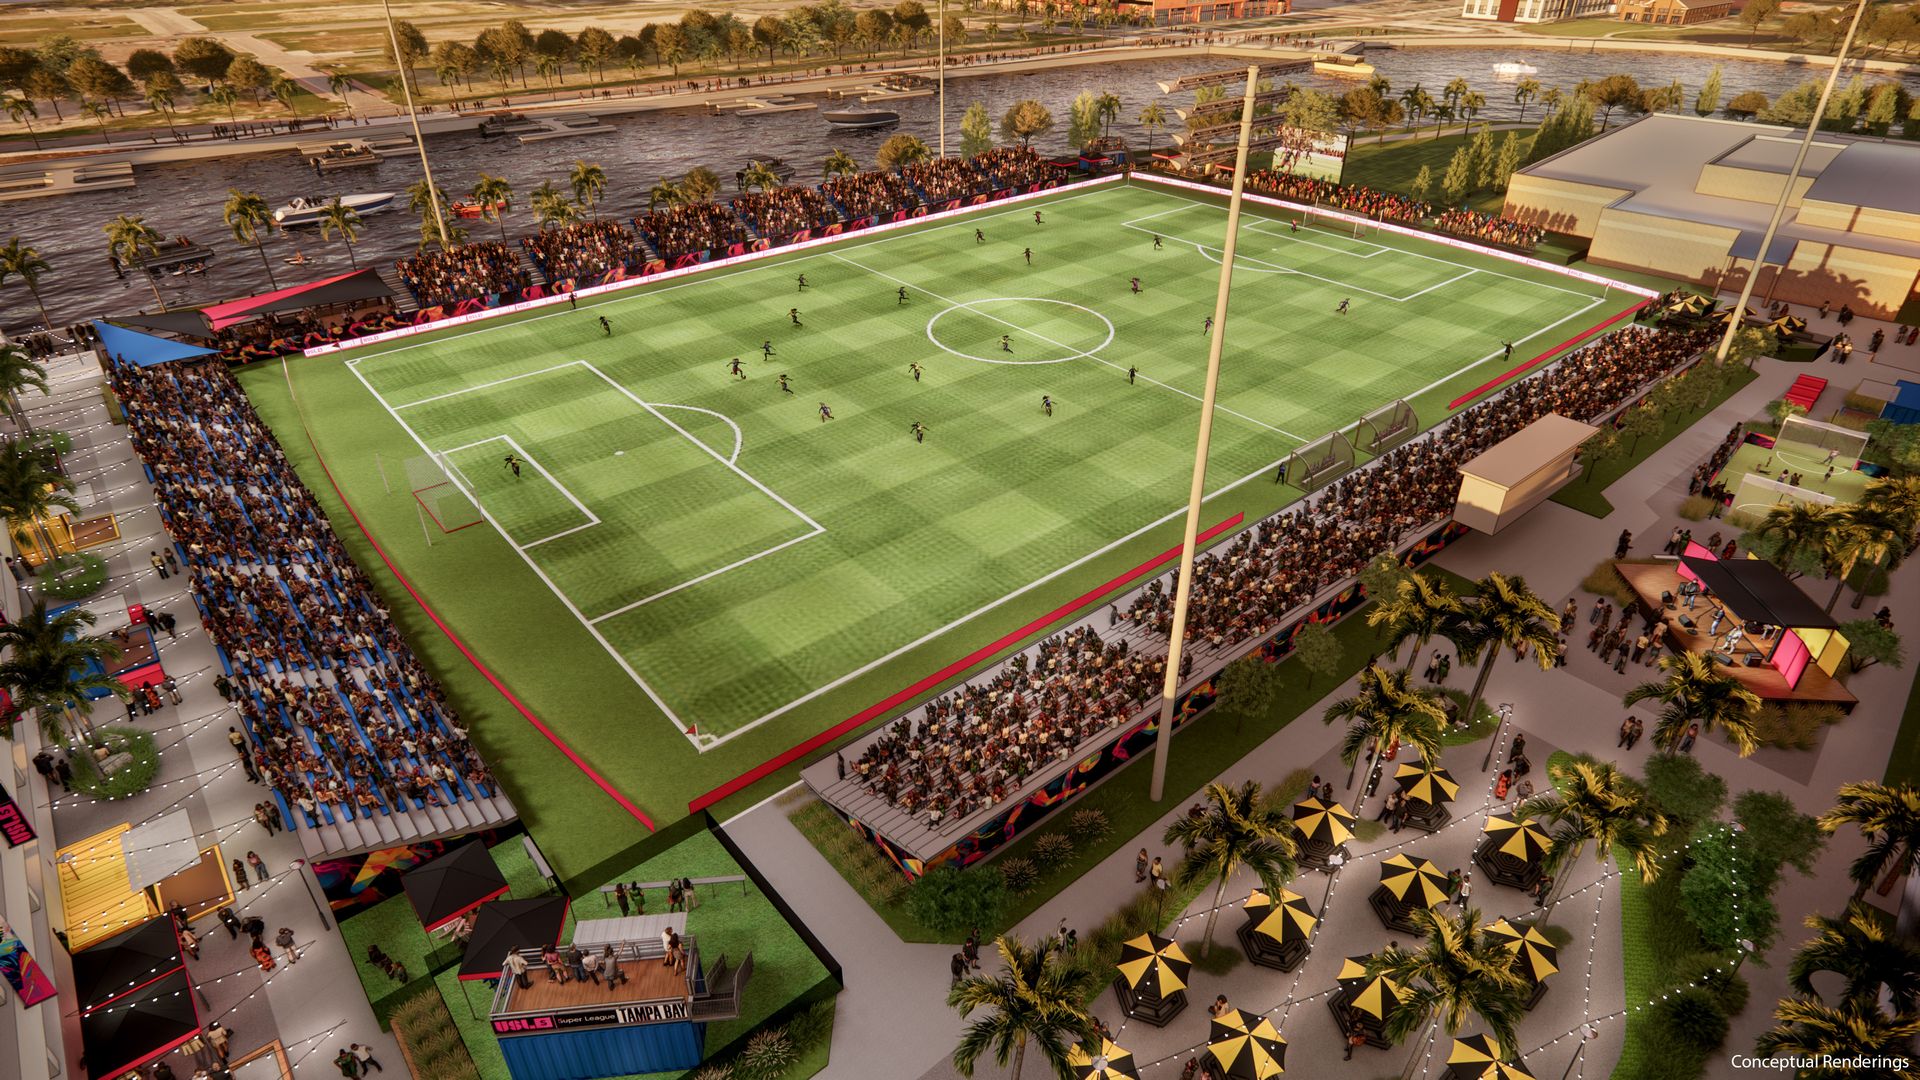 A rendering of a soccer field on a river with players on the field and fans filling up the stands.